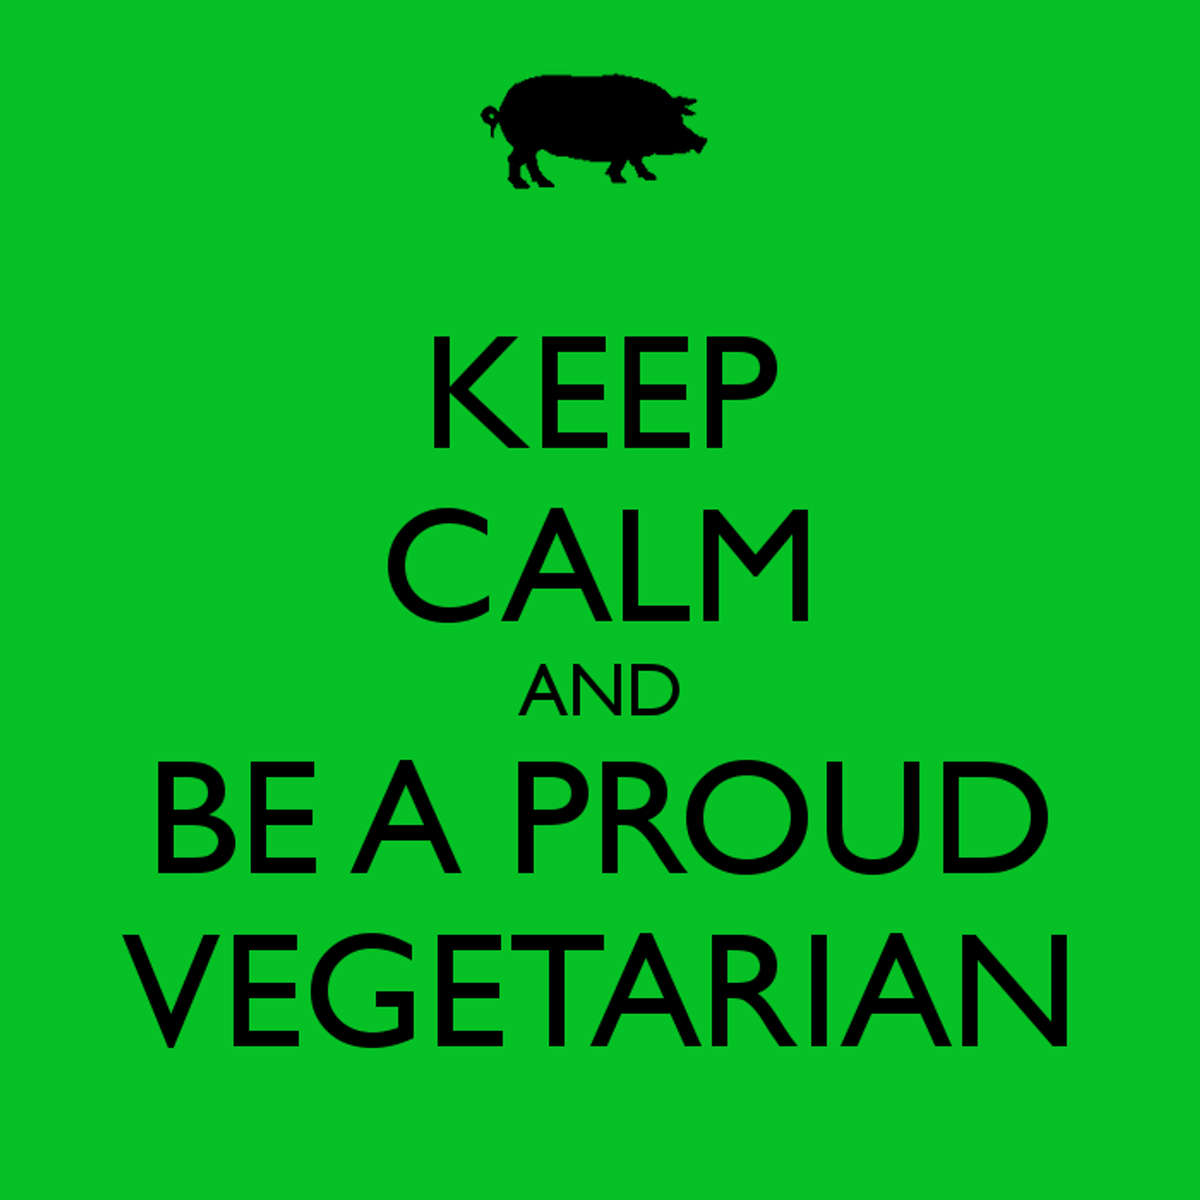 5 Reasons To Become A Vegetarian